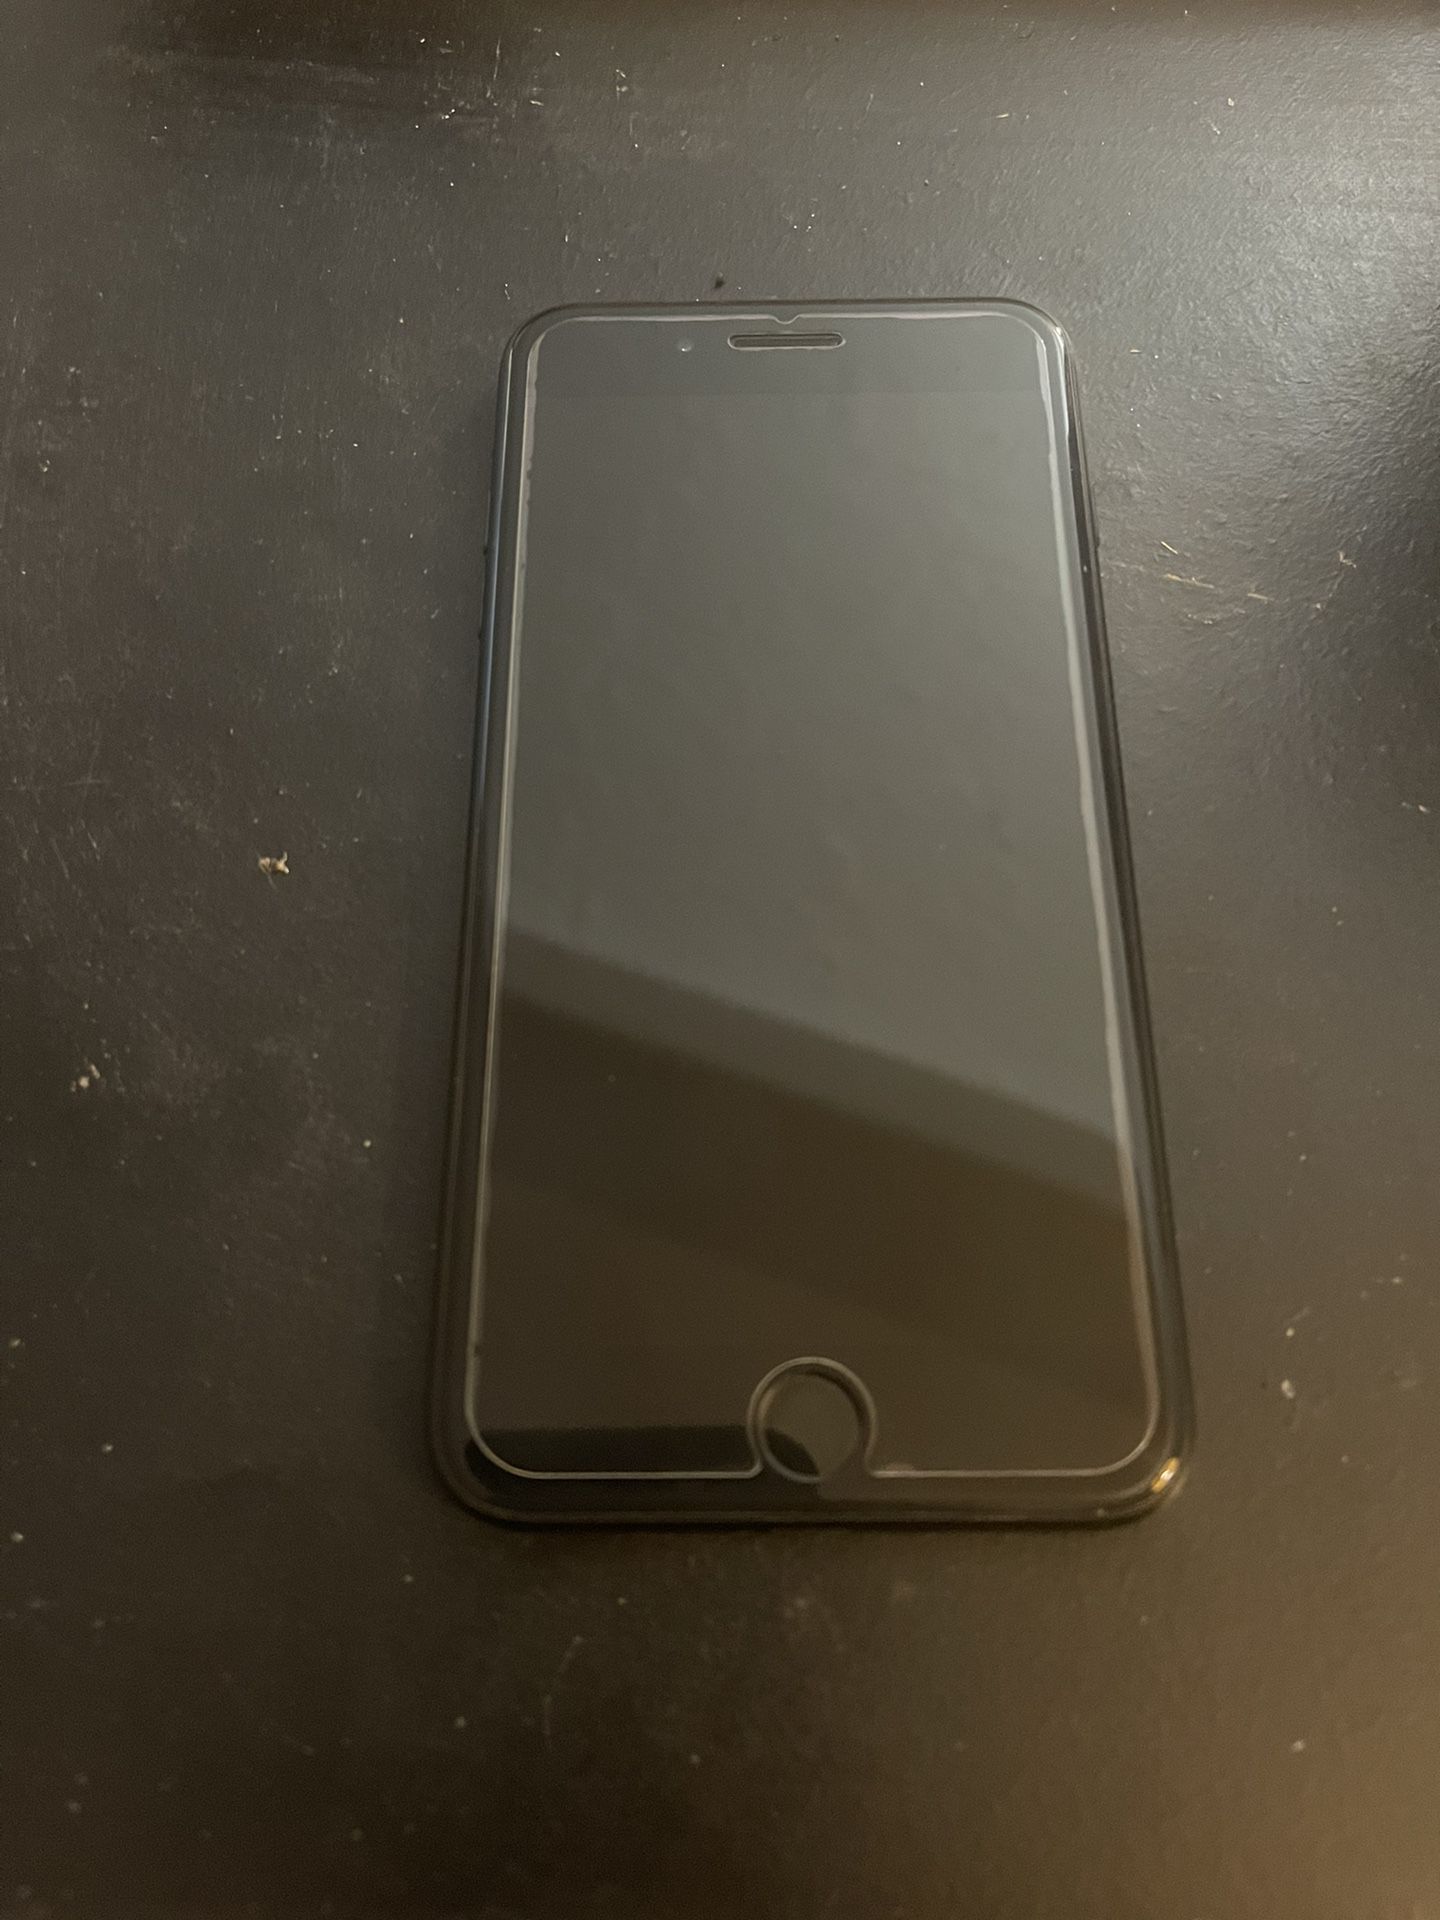 Apple iPhone 7 Plus (for parts)